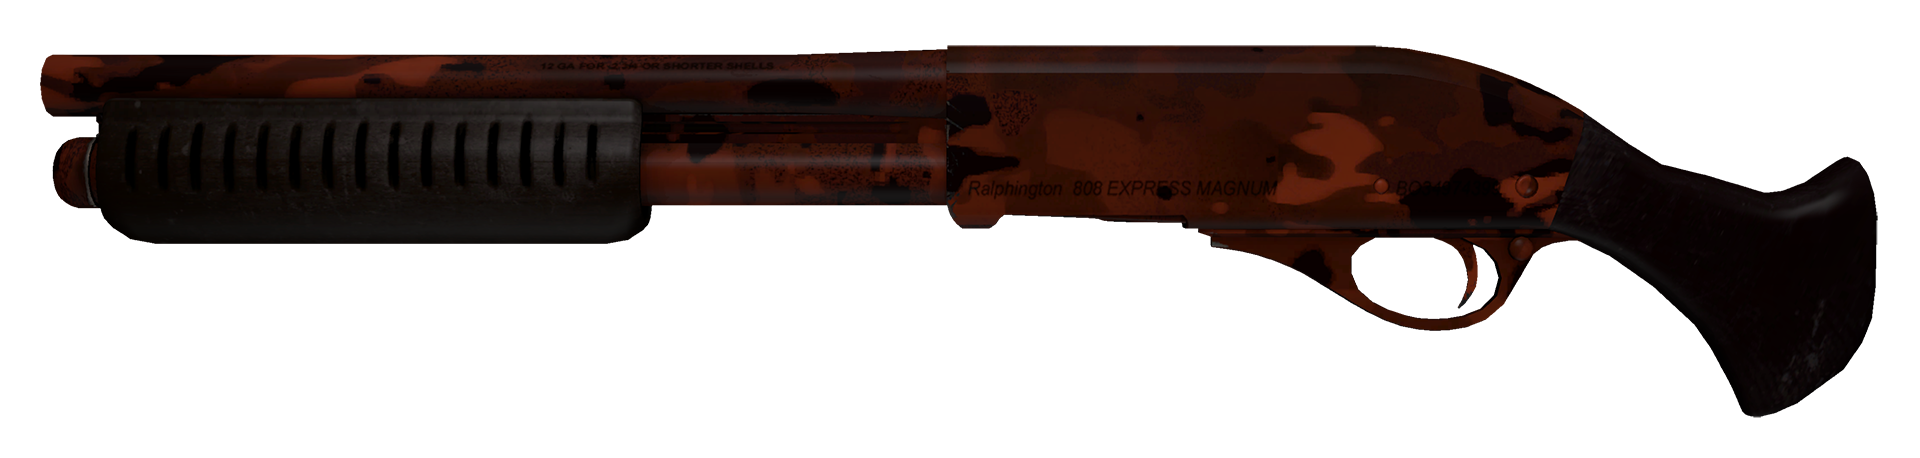 Sawed-Off Full Stop cs go skin for apple download